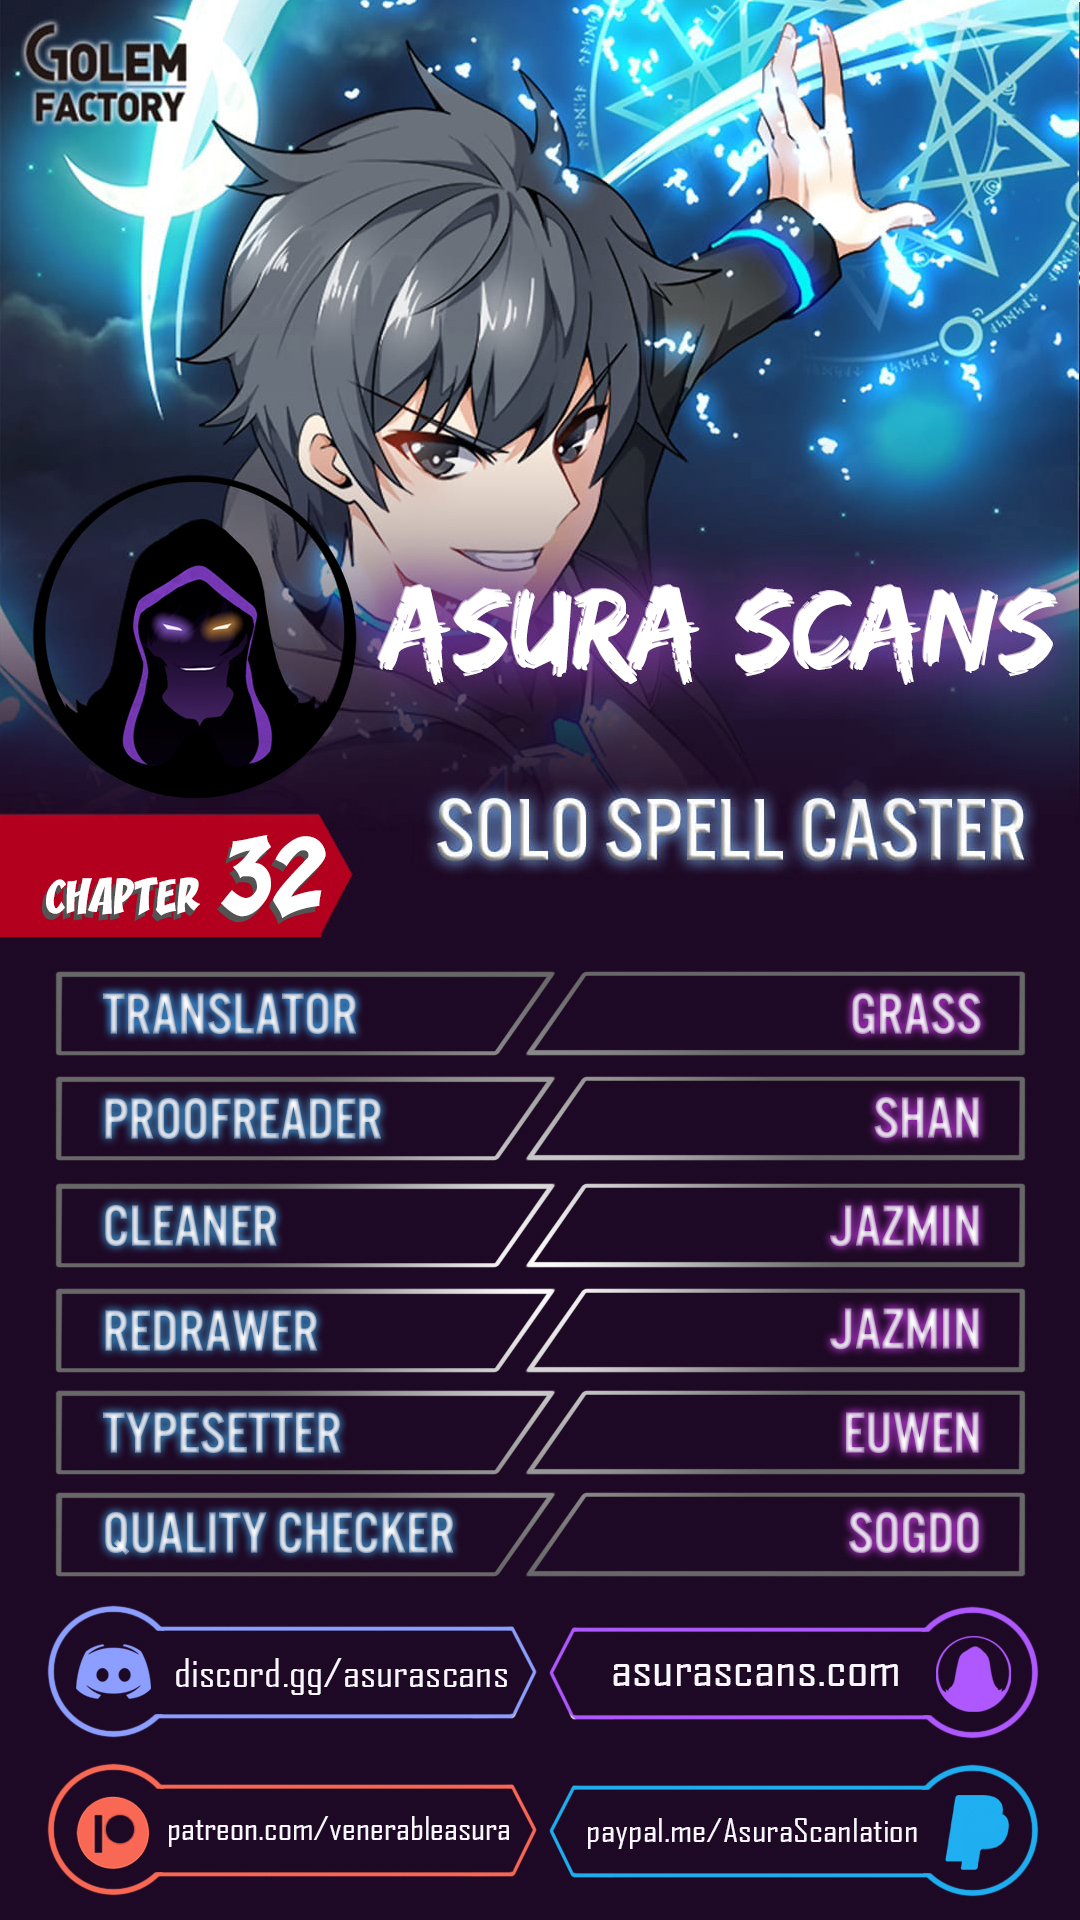 Solo Spell Caster Ch. 32